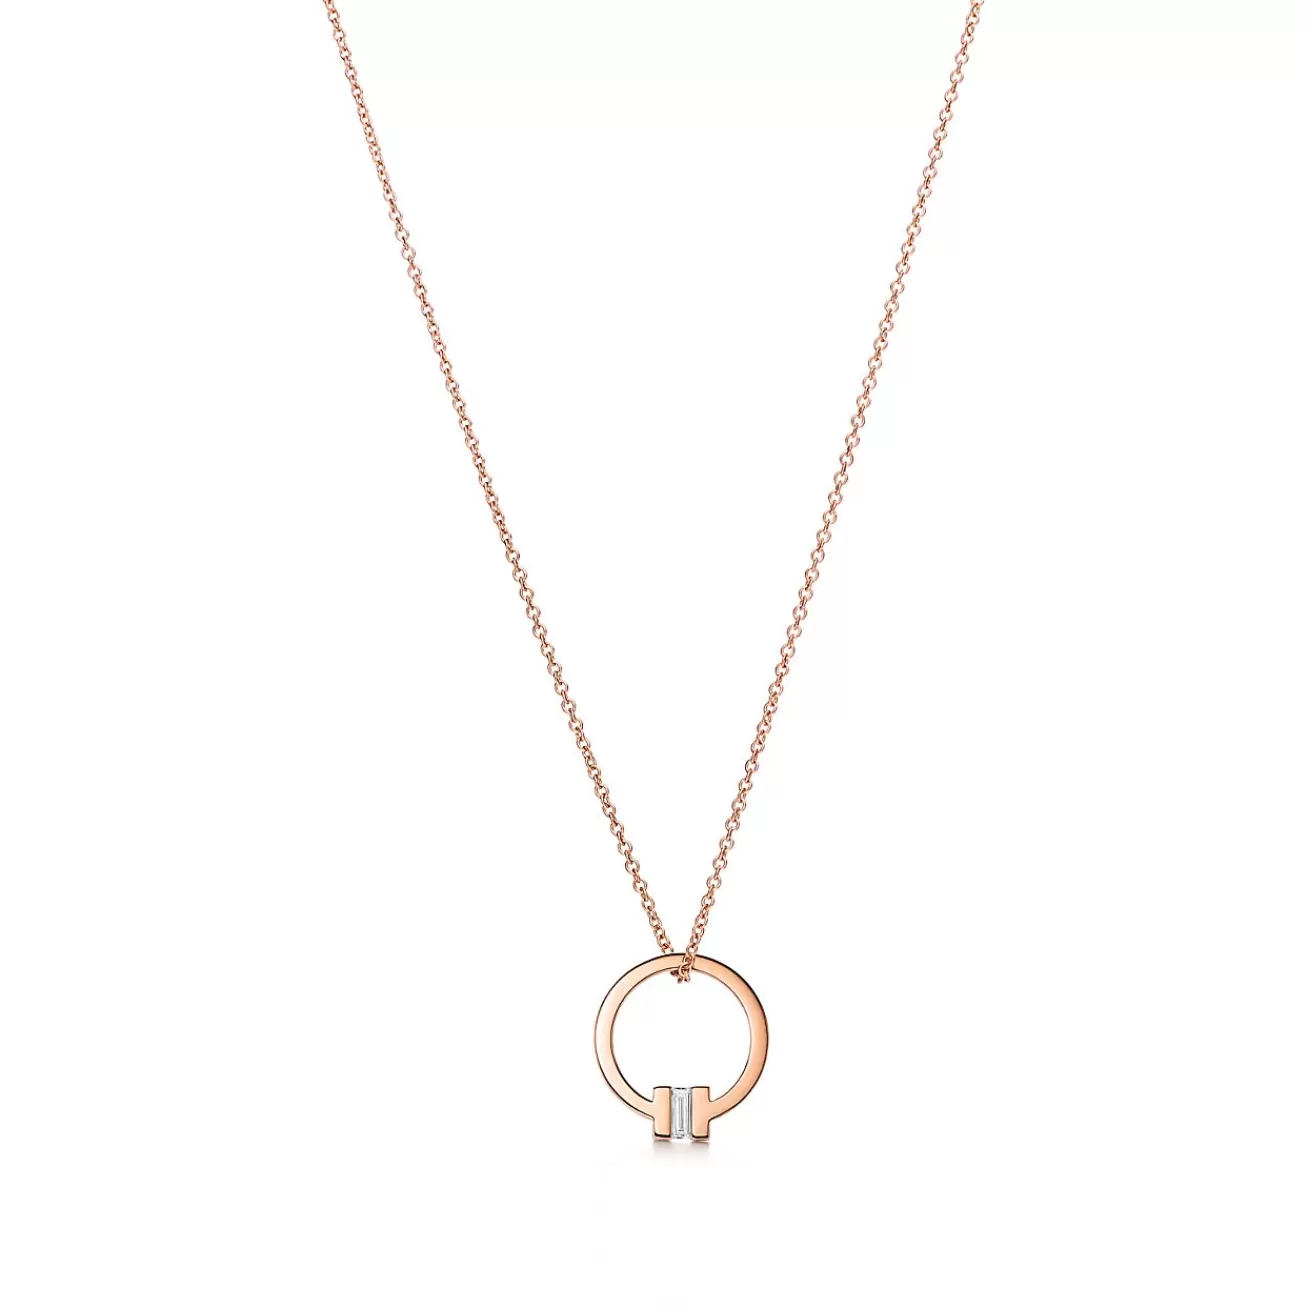 Tiffany & Co. Tiffany T pendant in 18k rose gold with a baguette diamond. | ^ Necklaces & Pendants | Men's Jewelry